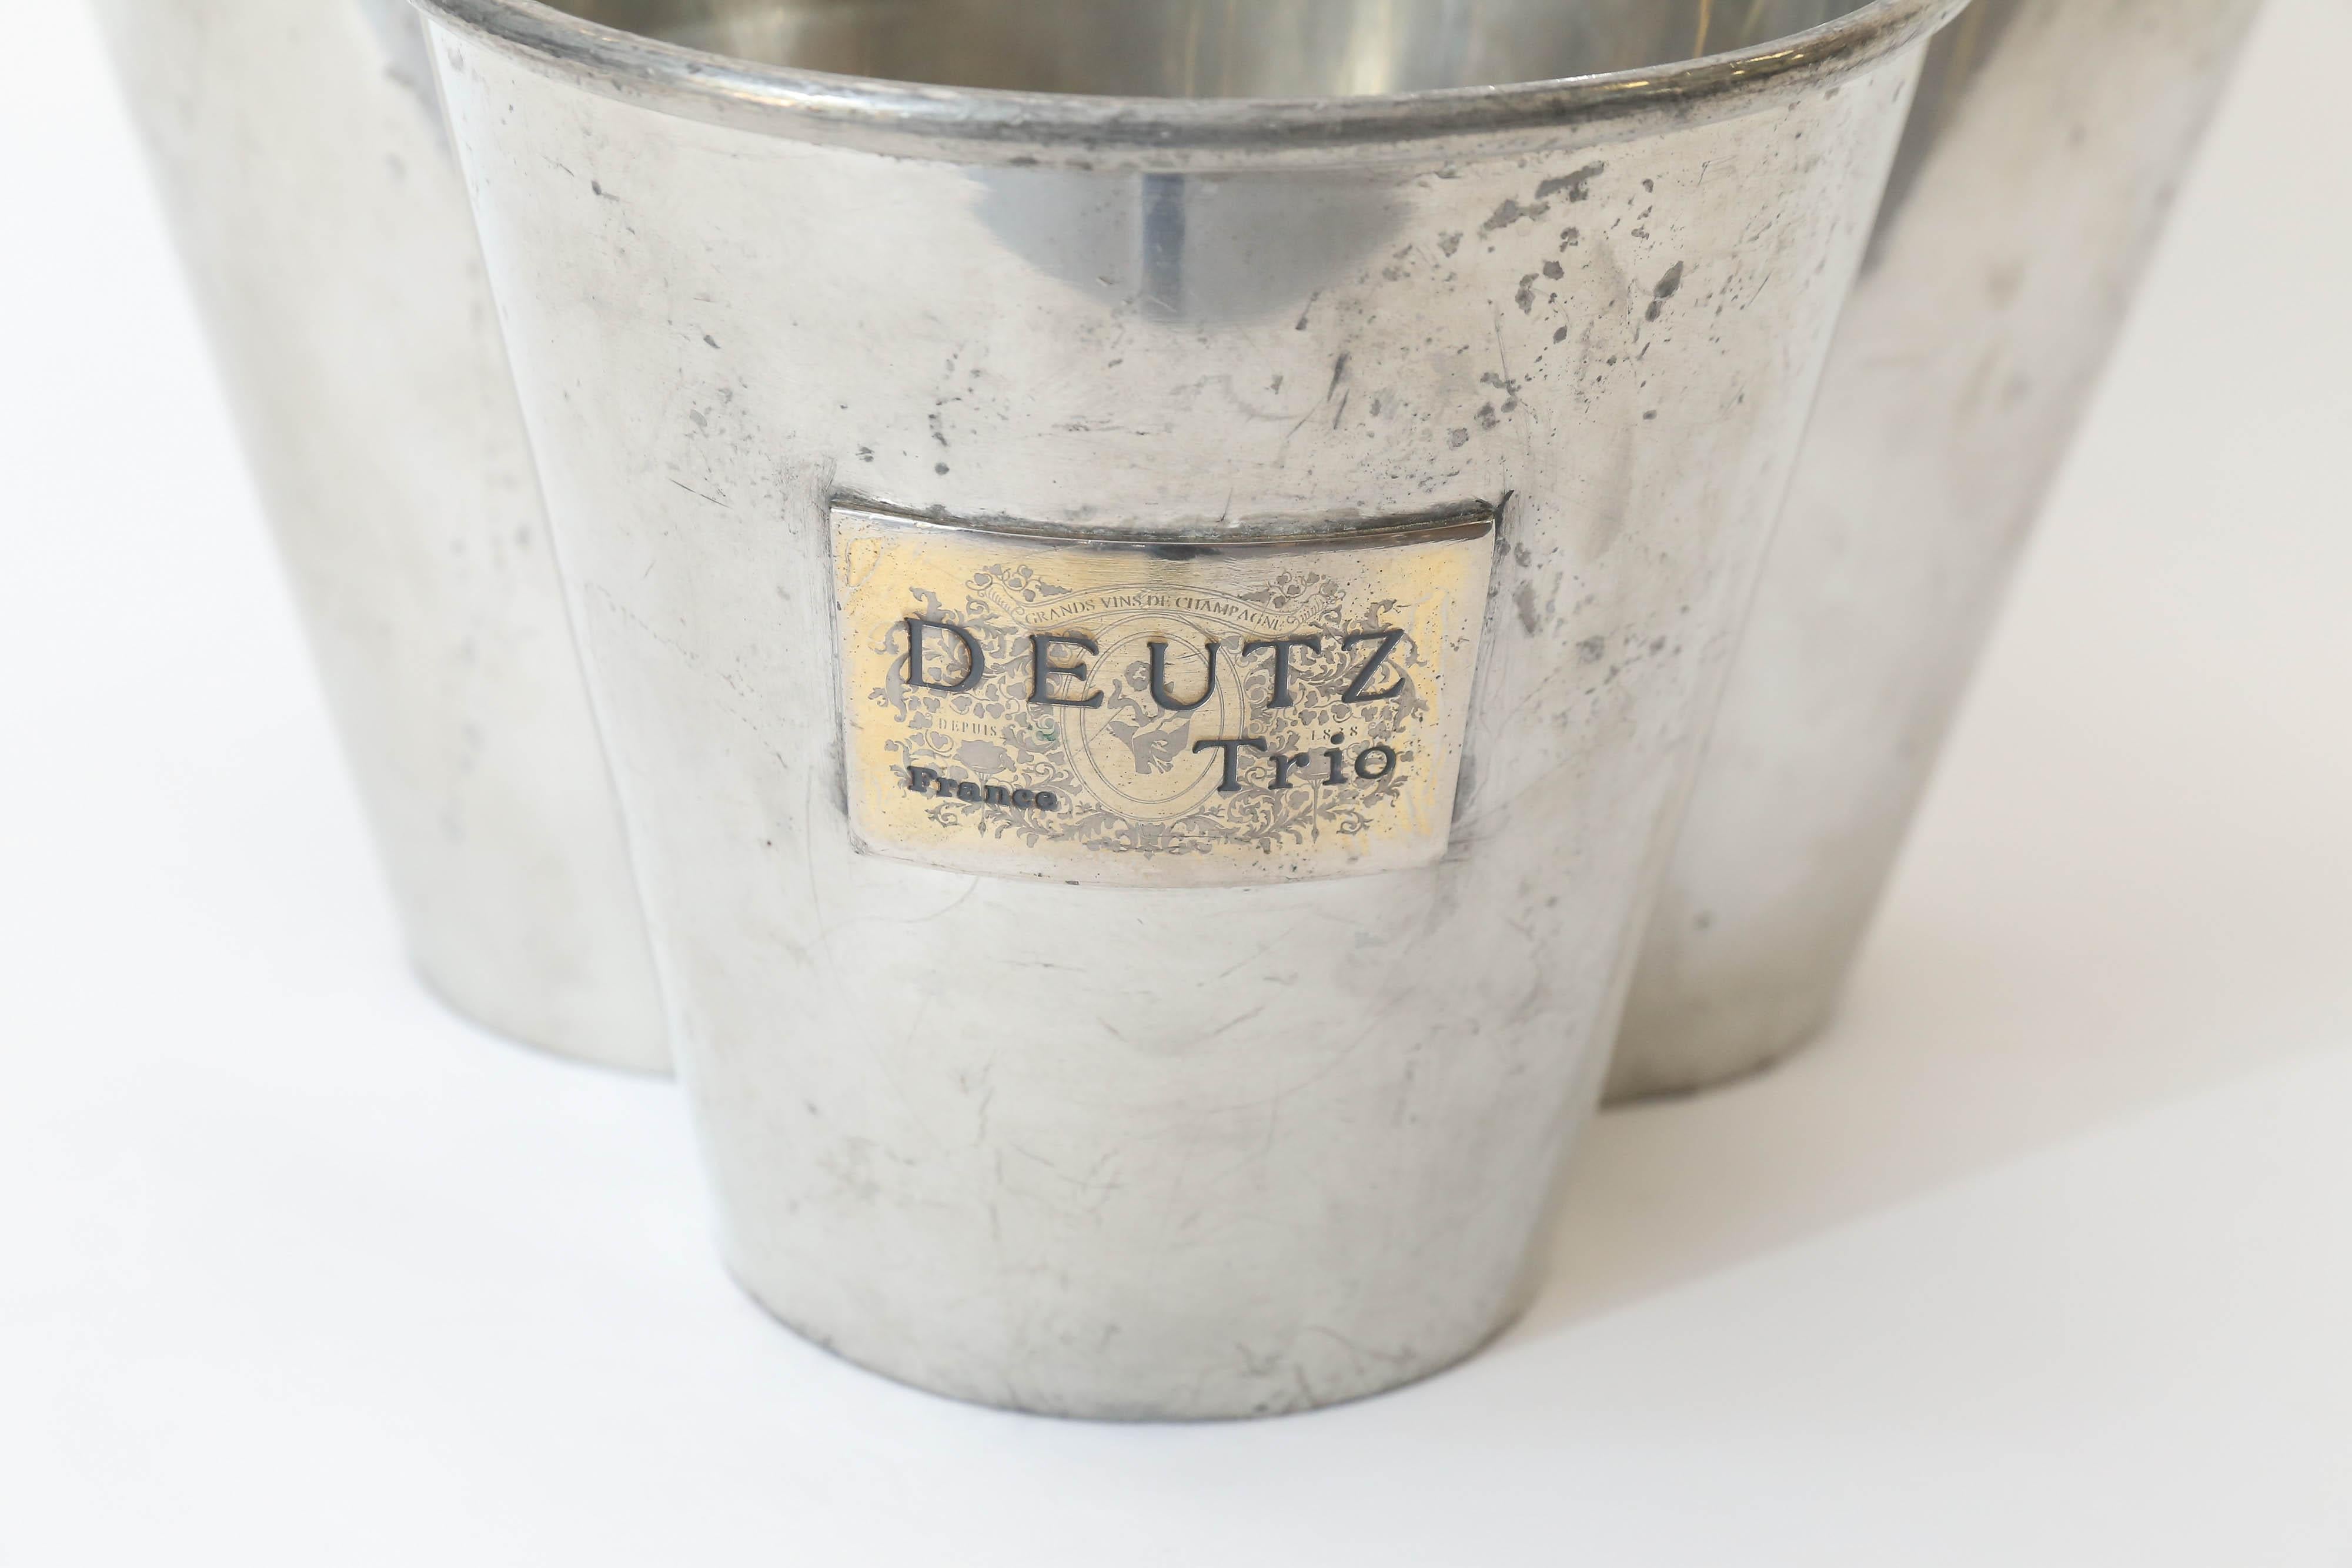 From France, a trio champagne cooler in hotel silver, joined together and decorated with brass plaques. Unique and useful, from the House of Deutz.